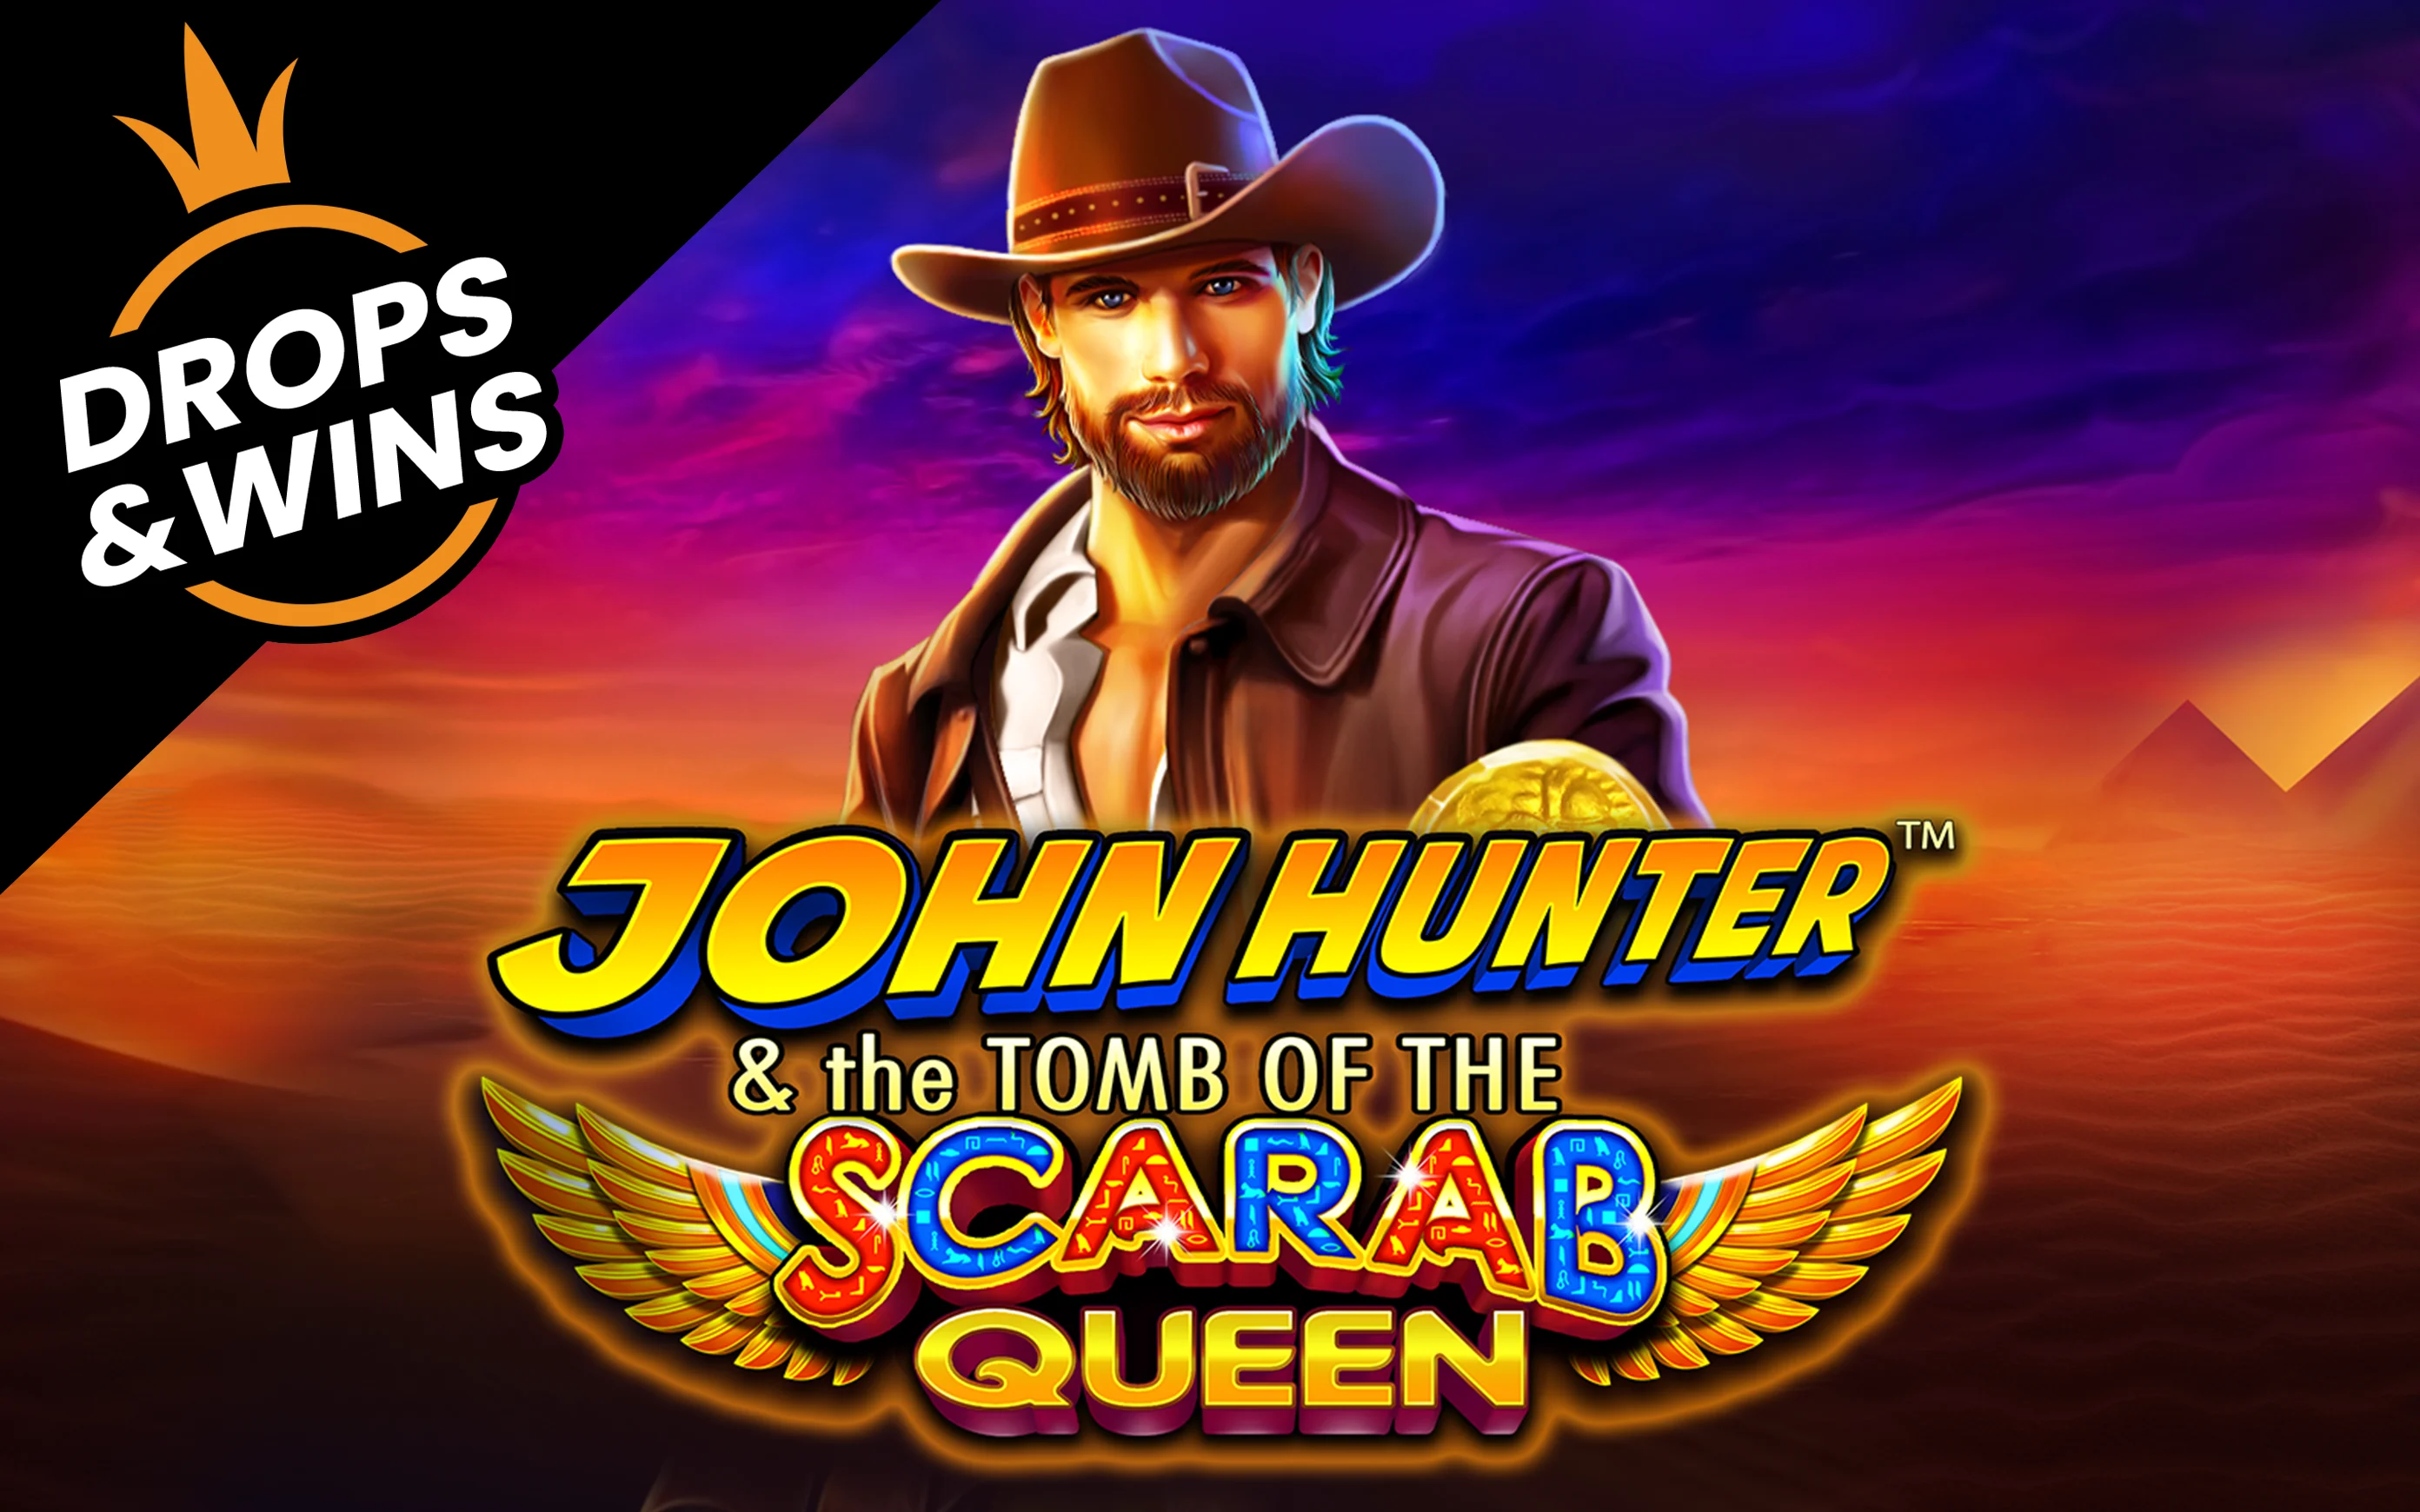 Gioca a John Hunter and the Tomb of the Scarab Queen™ sul casino online Starcasino.be